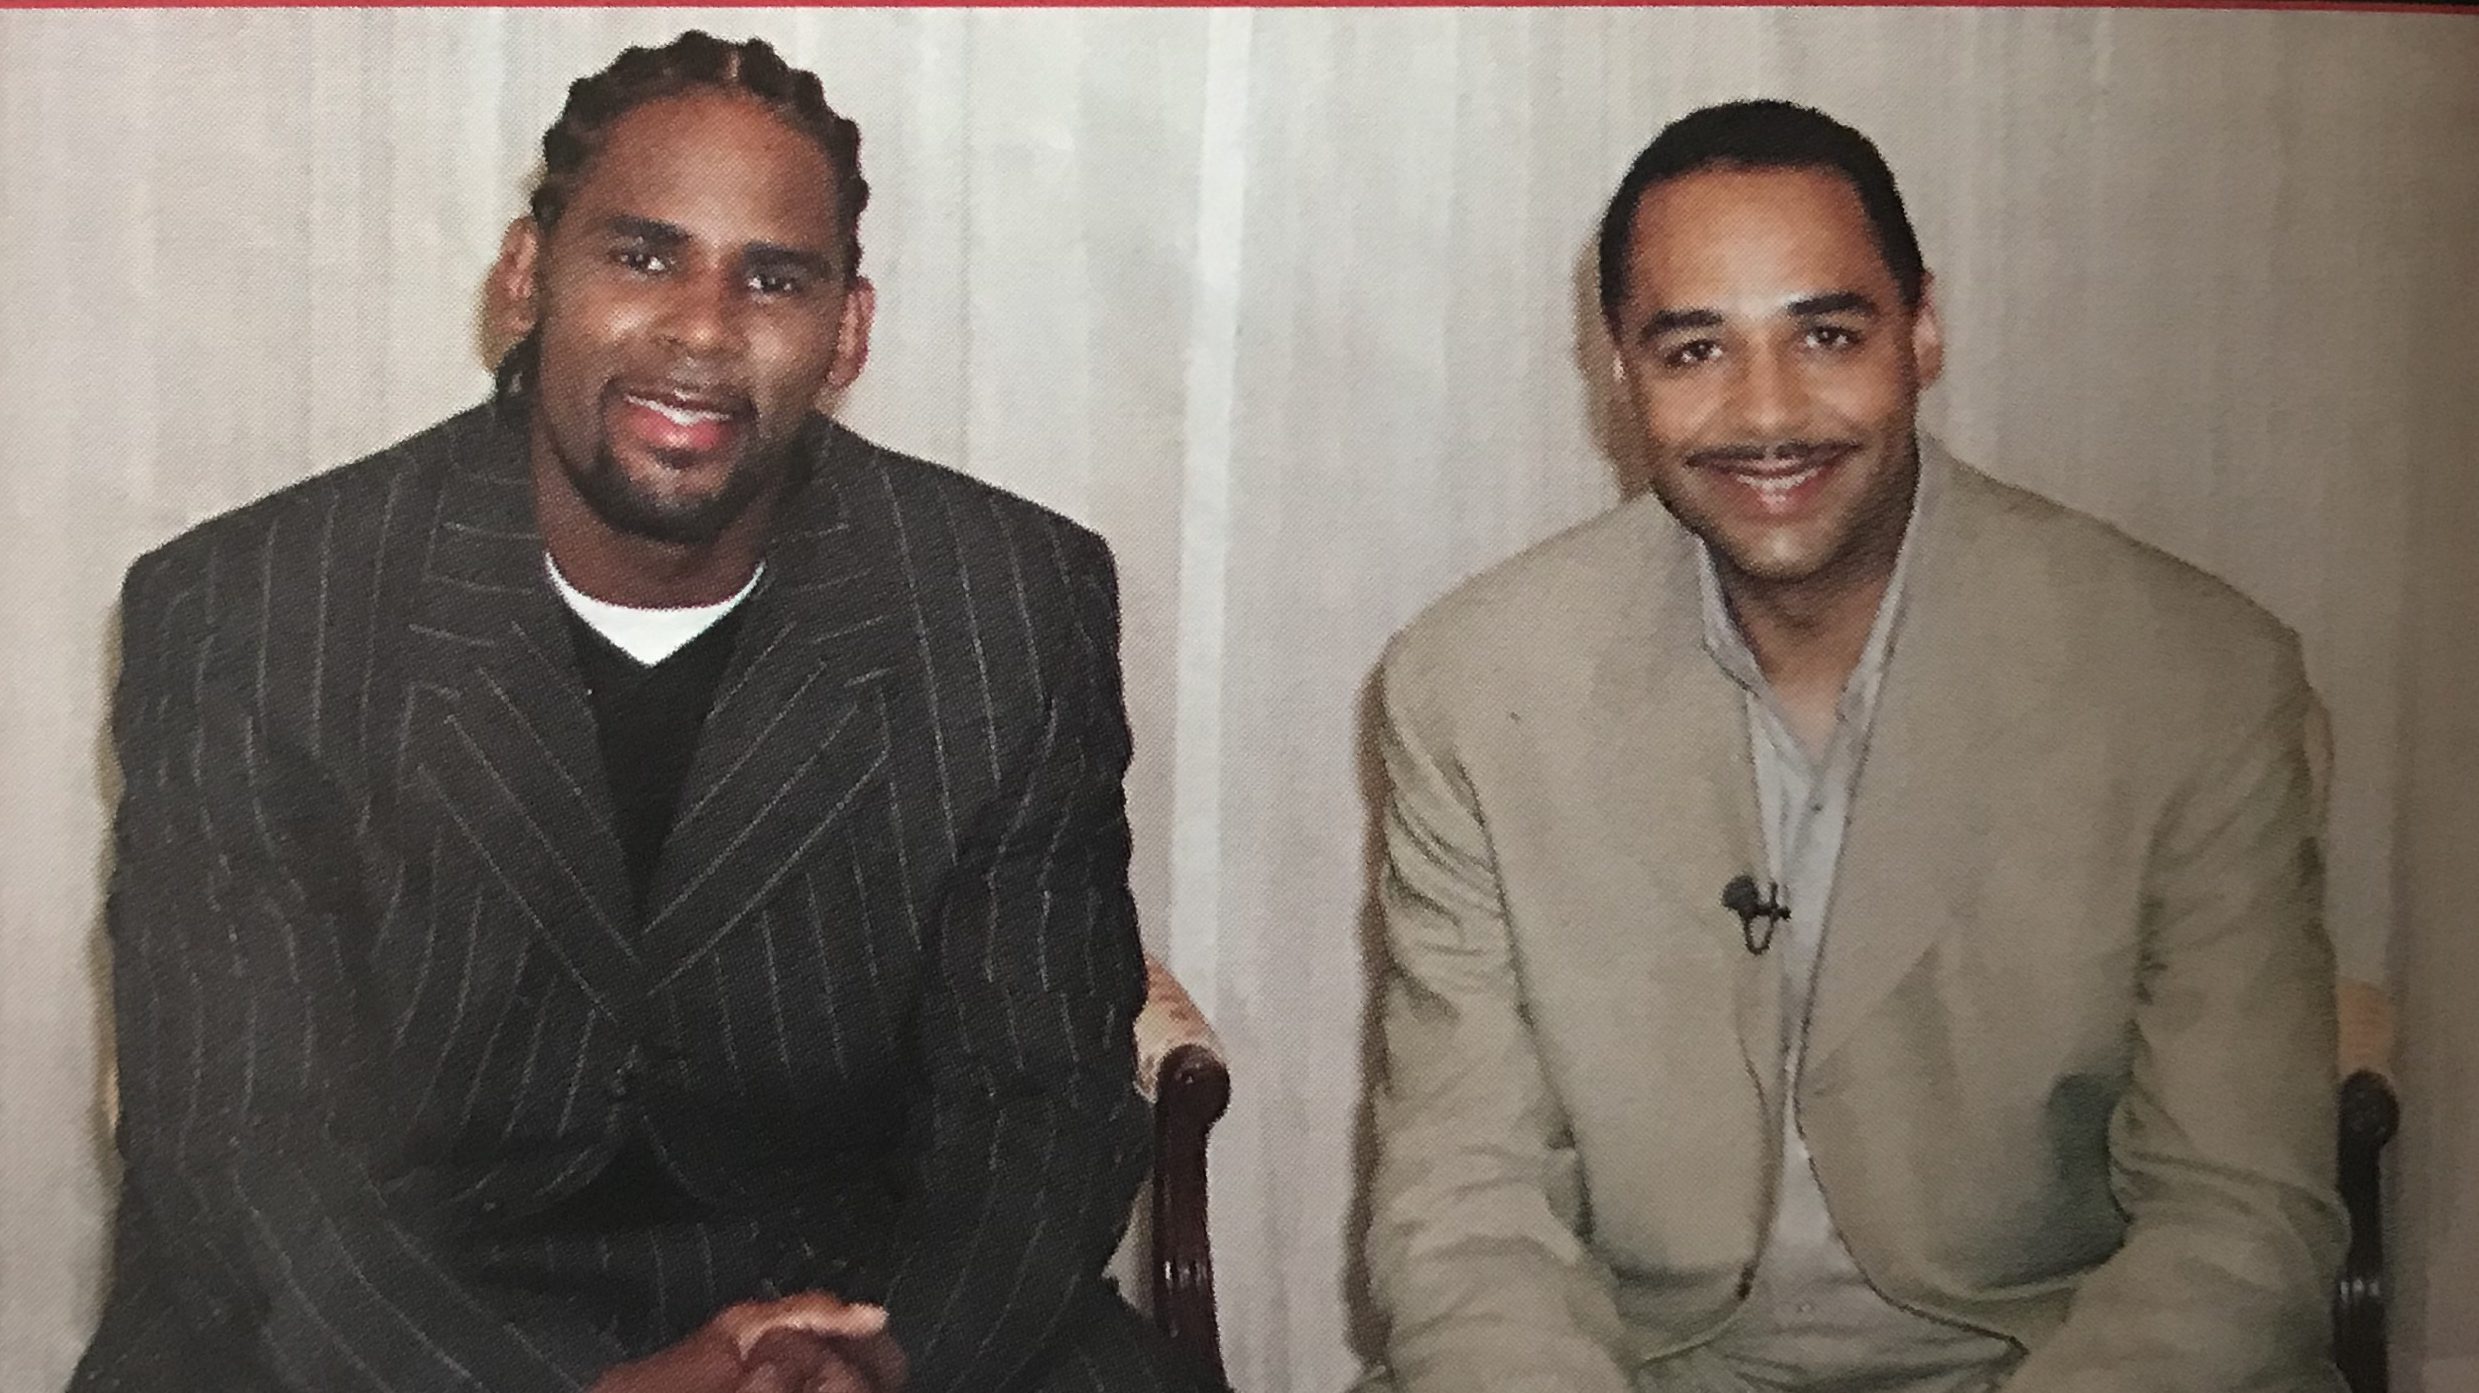 Veteran journalist Ed Gordon revisits his 2002 interview with R. Kelly and explains ...2479 x 1393